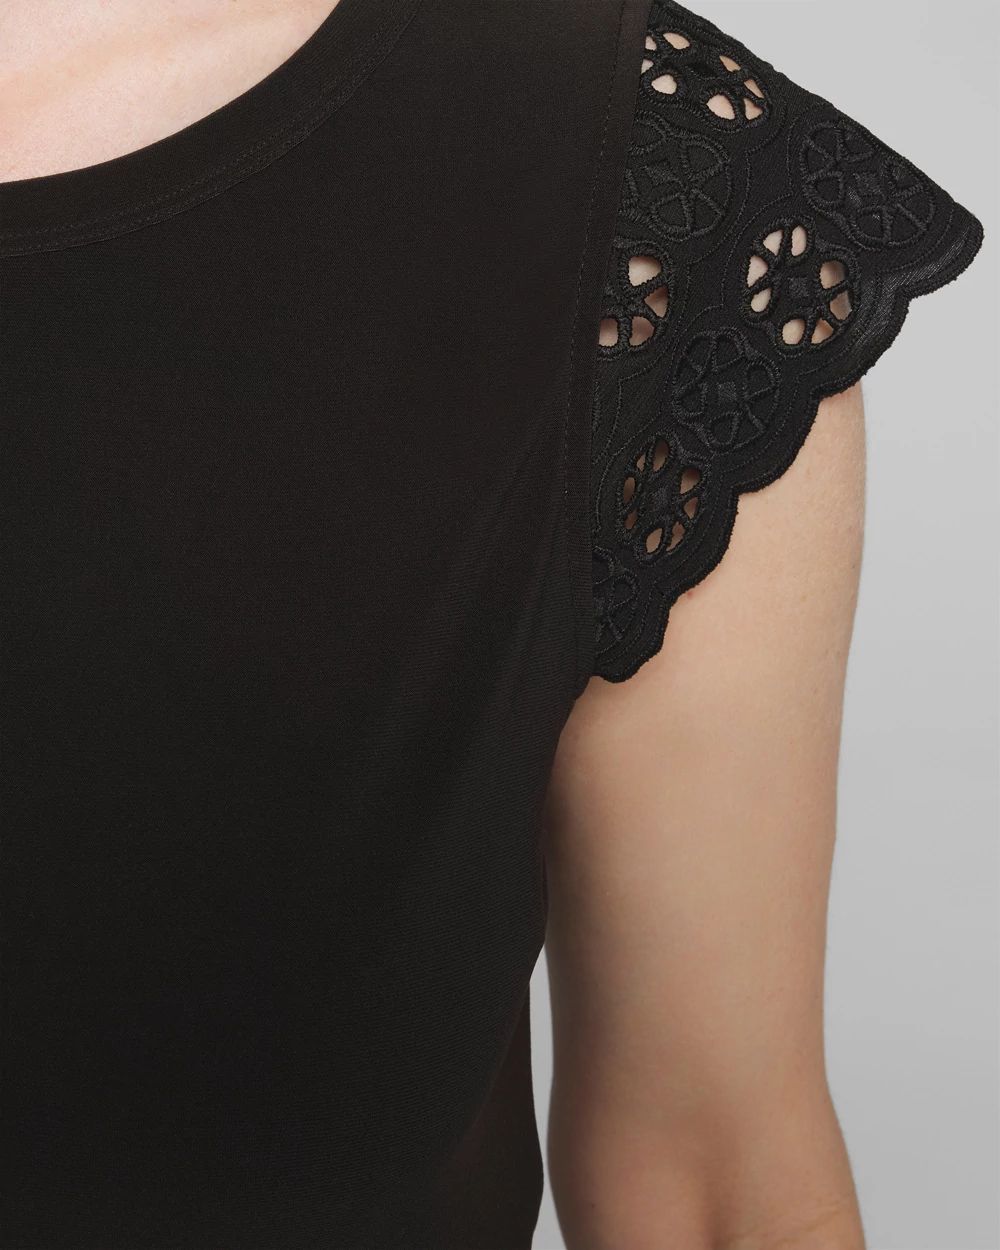 Outlet WHBM Eyelet Sleeve Tee click to view larger image.